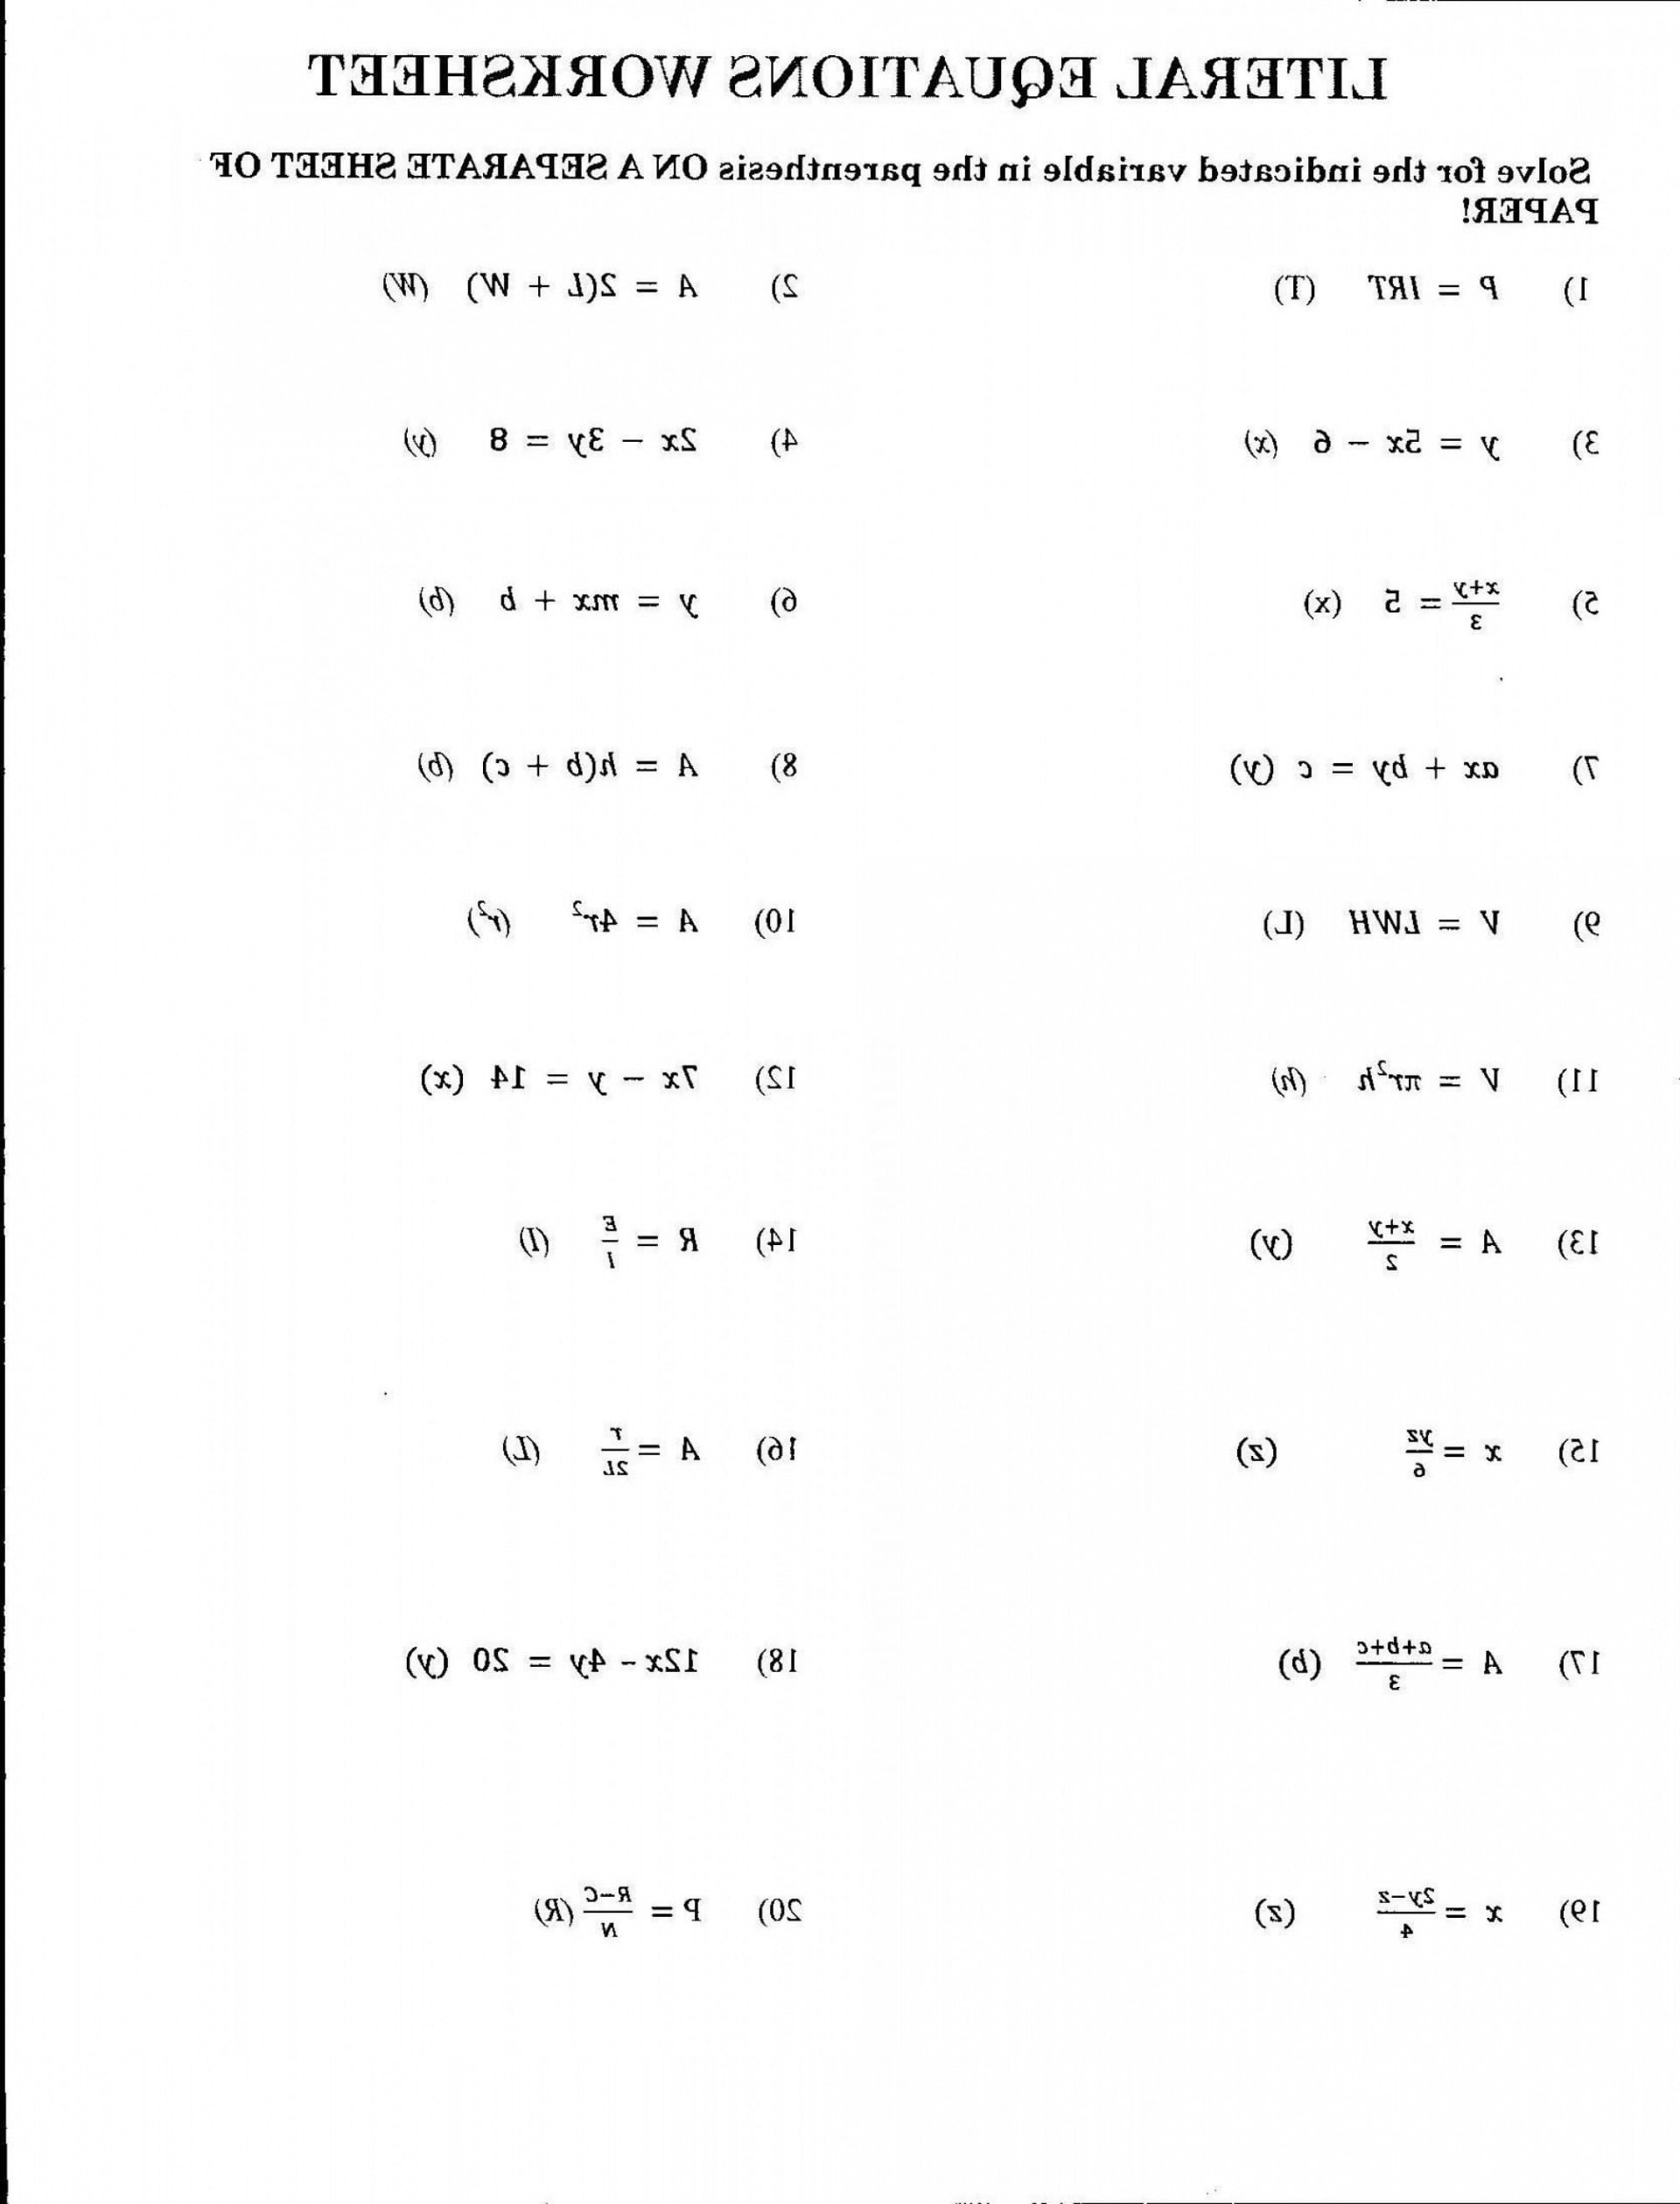 045-linear-equations-word-problems-printable-worksheet-db-excel